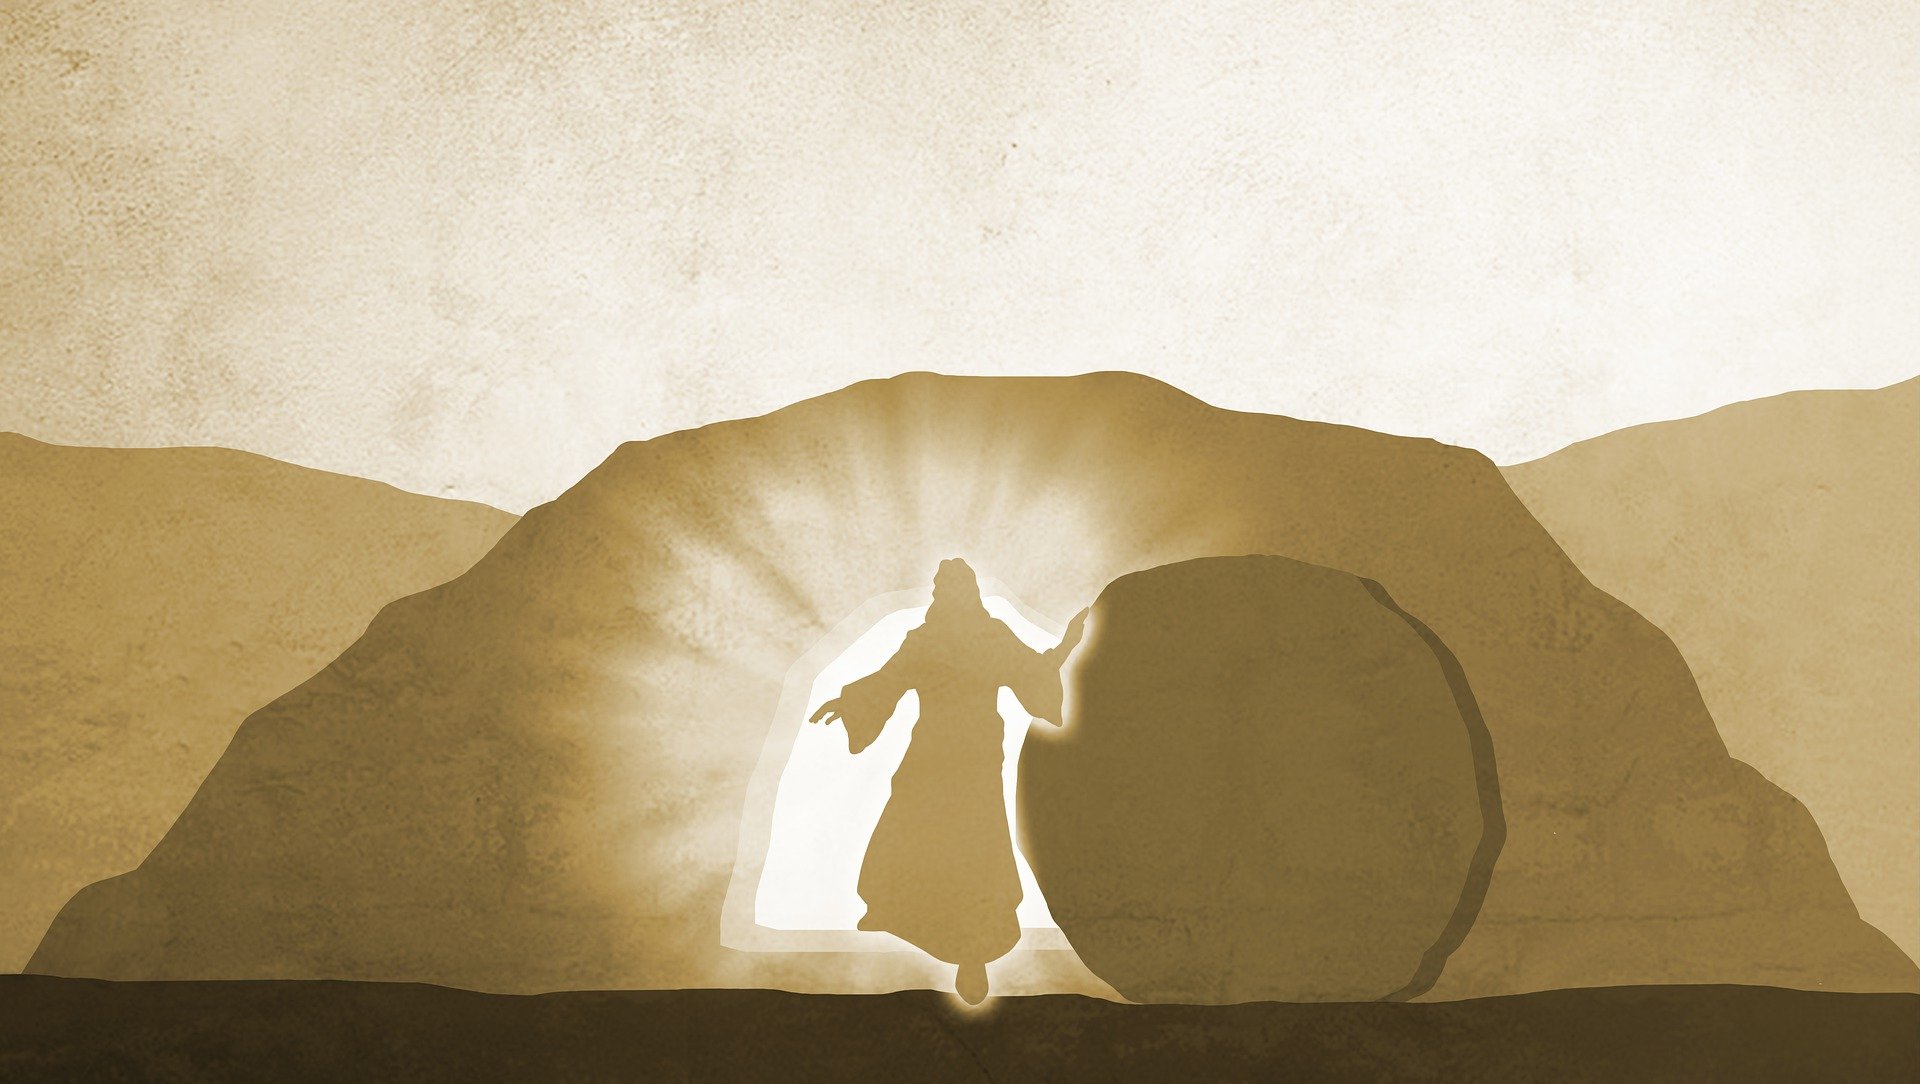 Resurrection of Jesus (Image by Jeff Jacobs from Pixabay)